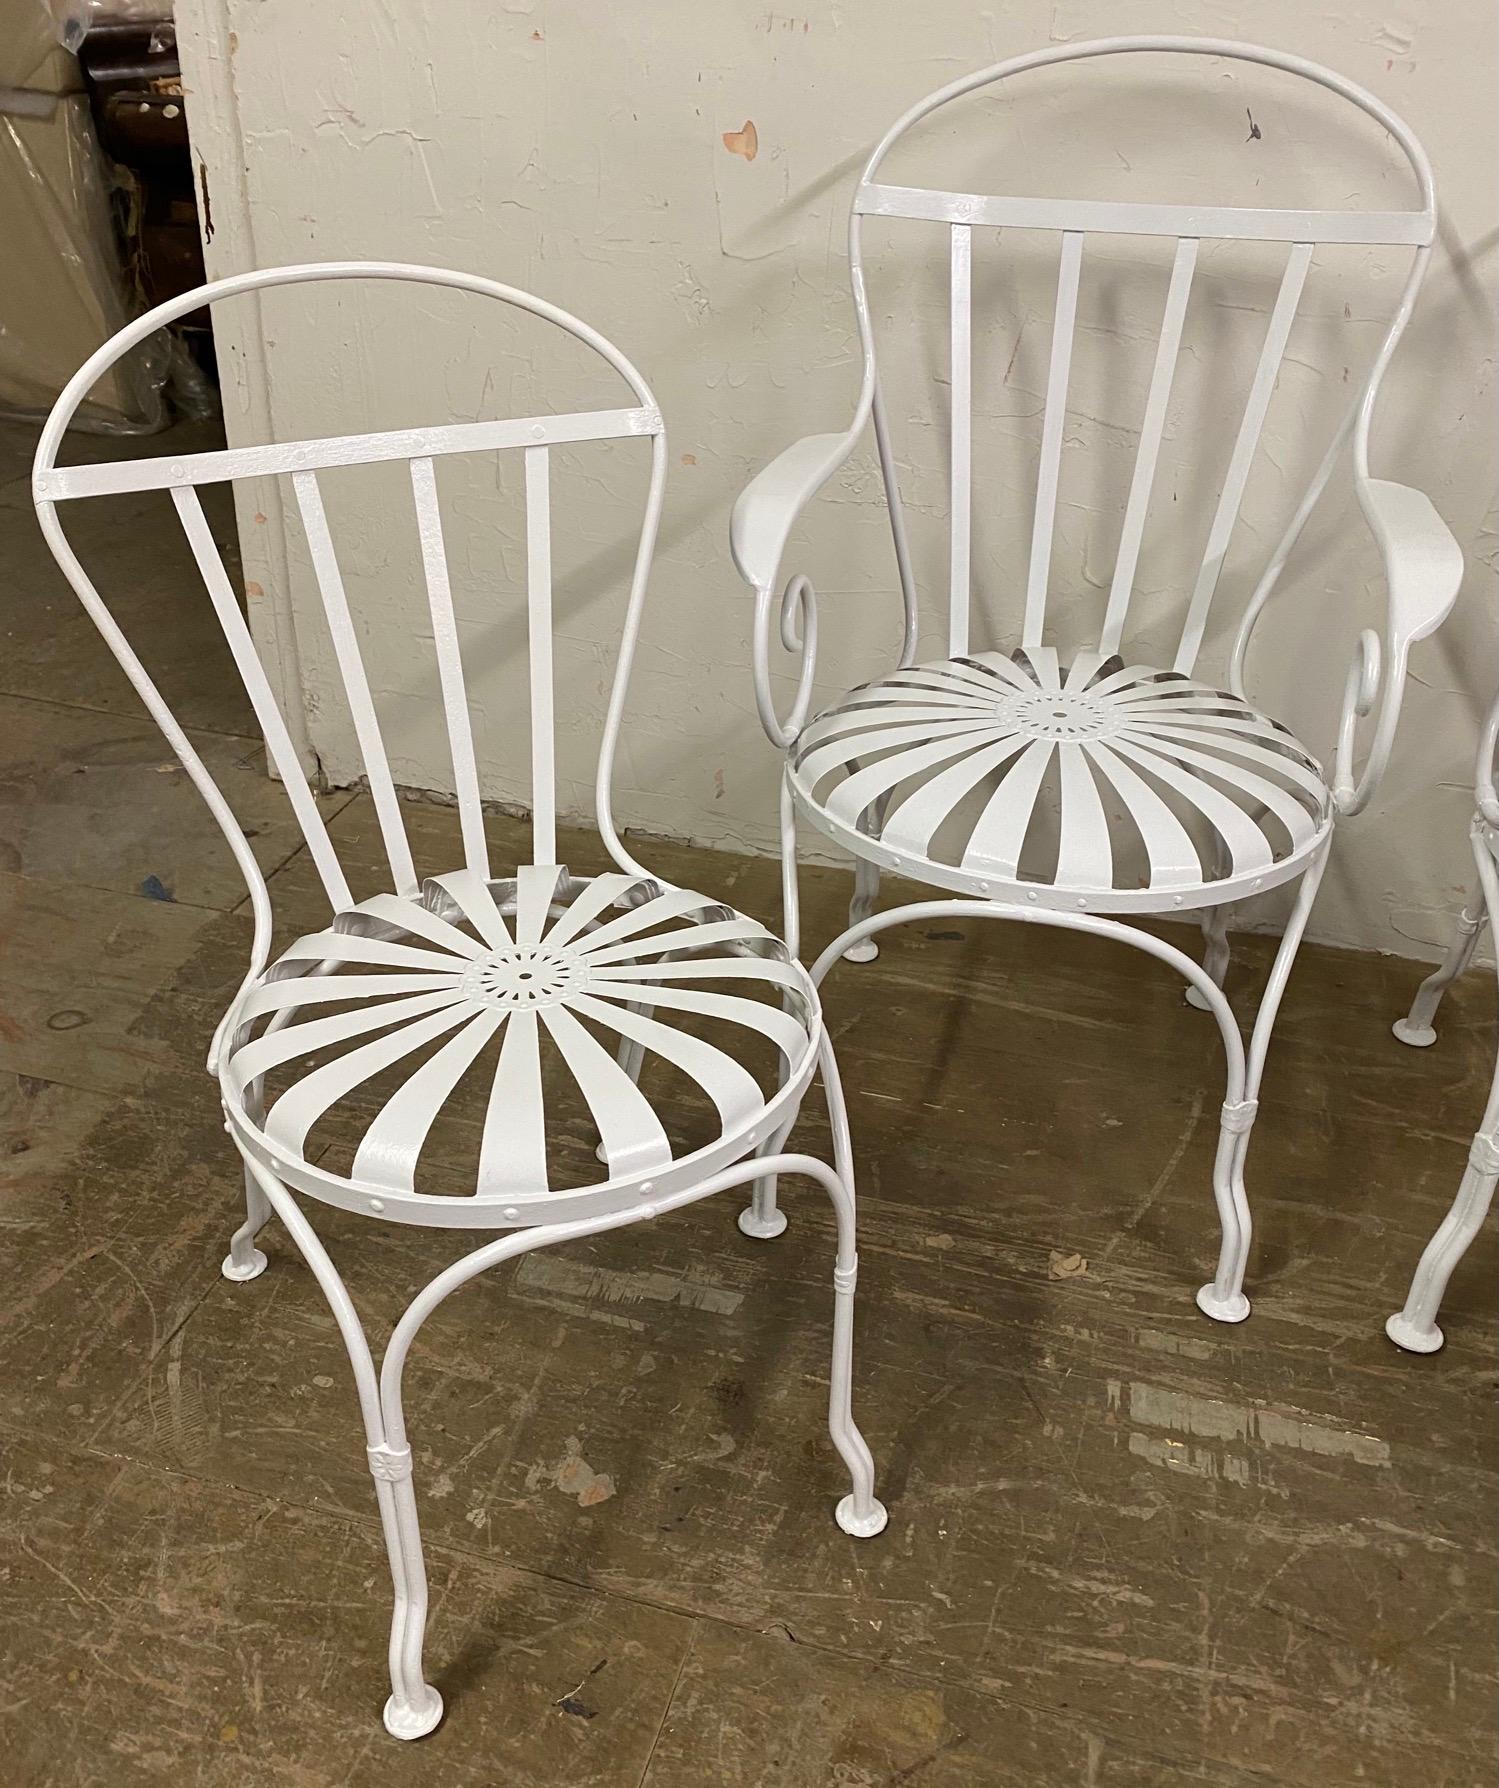 Set of 4 Art Deco Francois Carre style French sunburst garden dining chairs -- 2 arm chairs and 2 side chairs painted white. Wonderful to use for outdoor dining chairs, patio or garden chairs. Perfect chairs for a small kitchen table or the corner